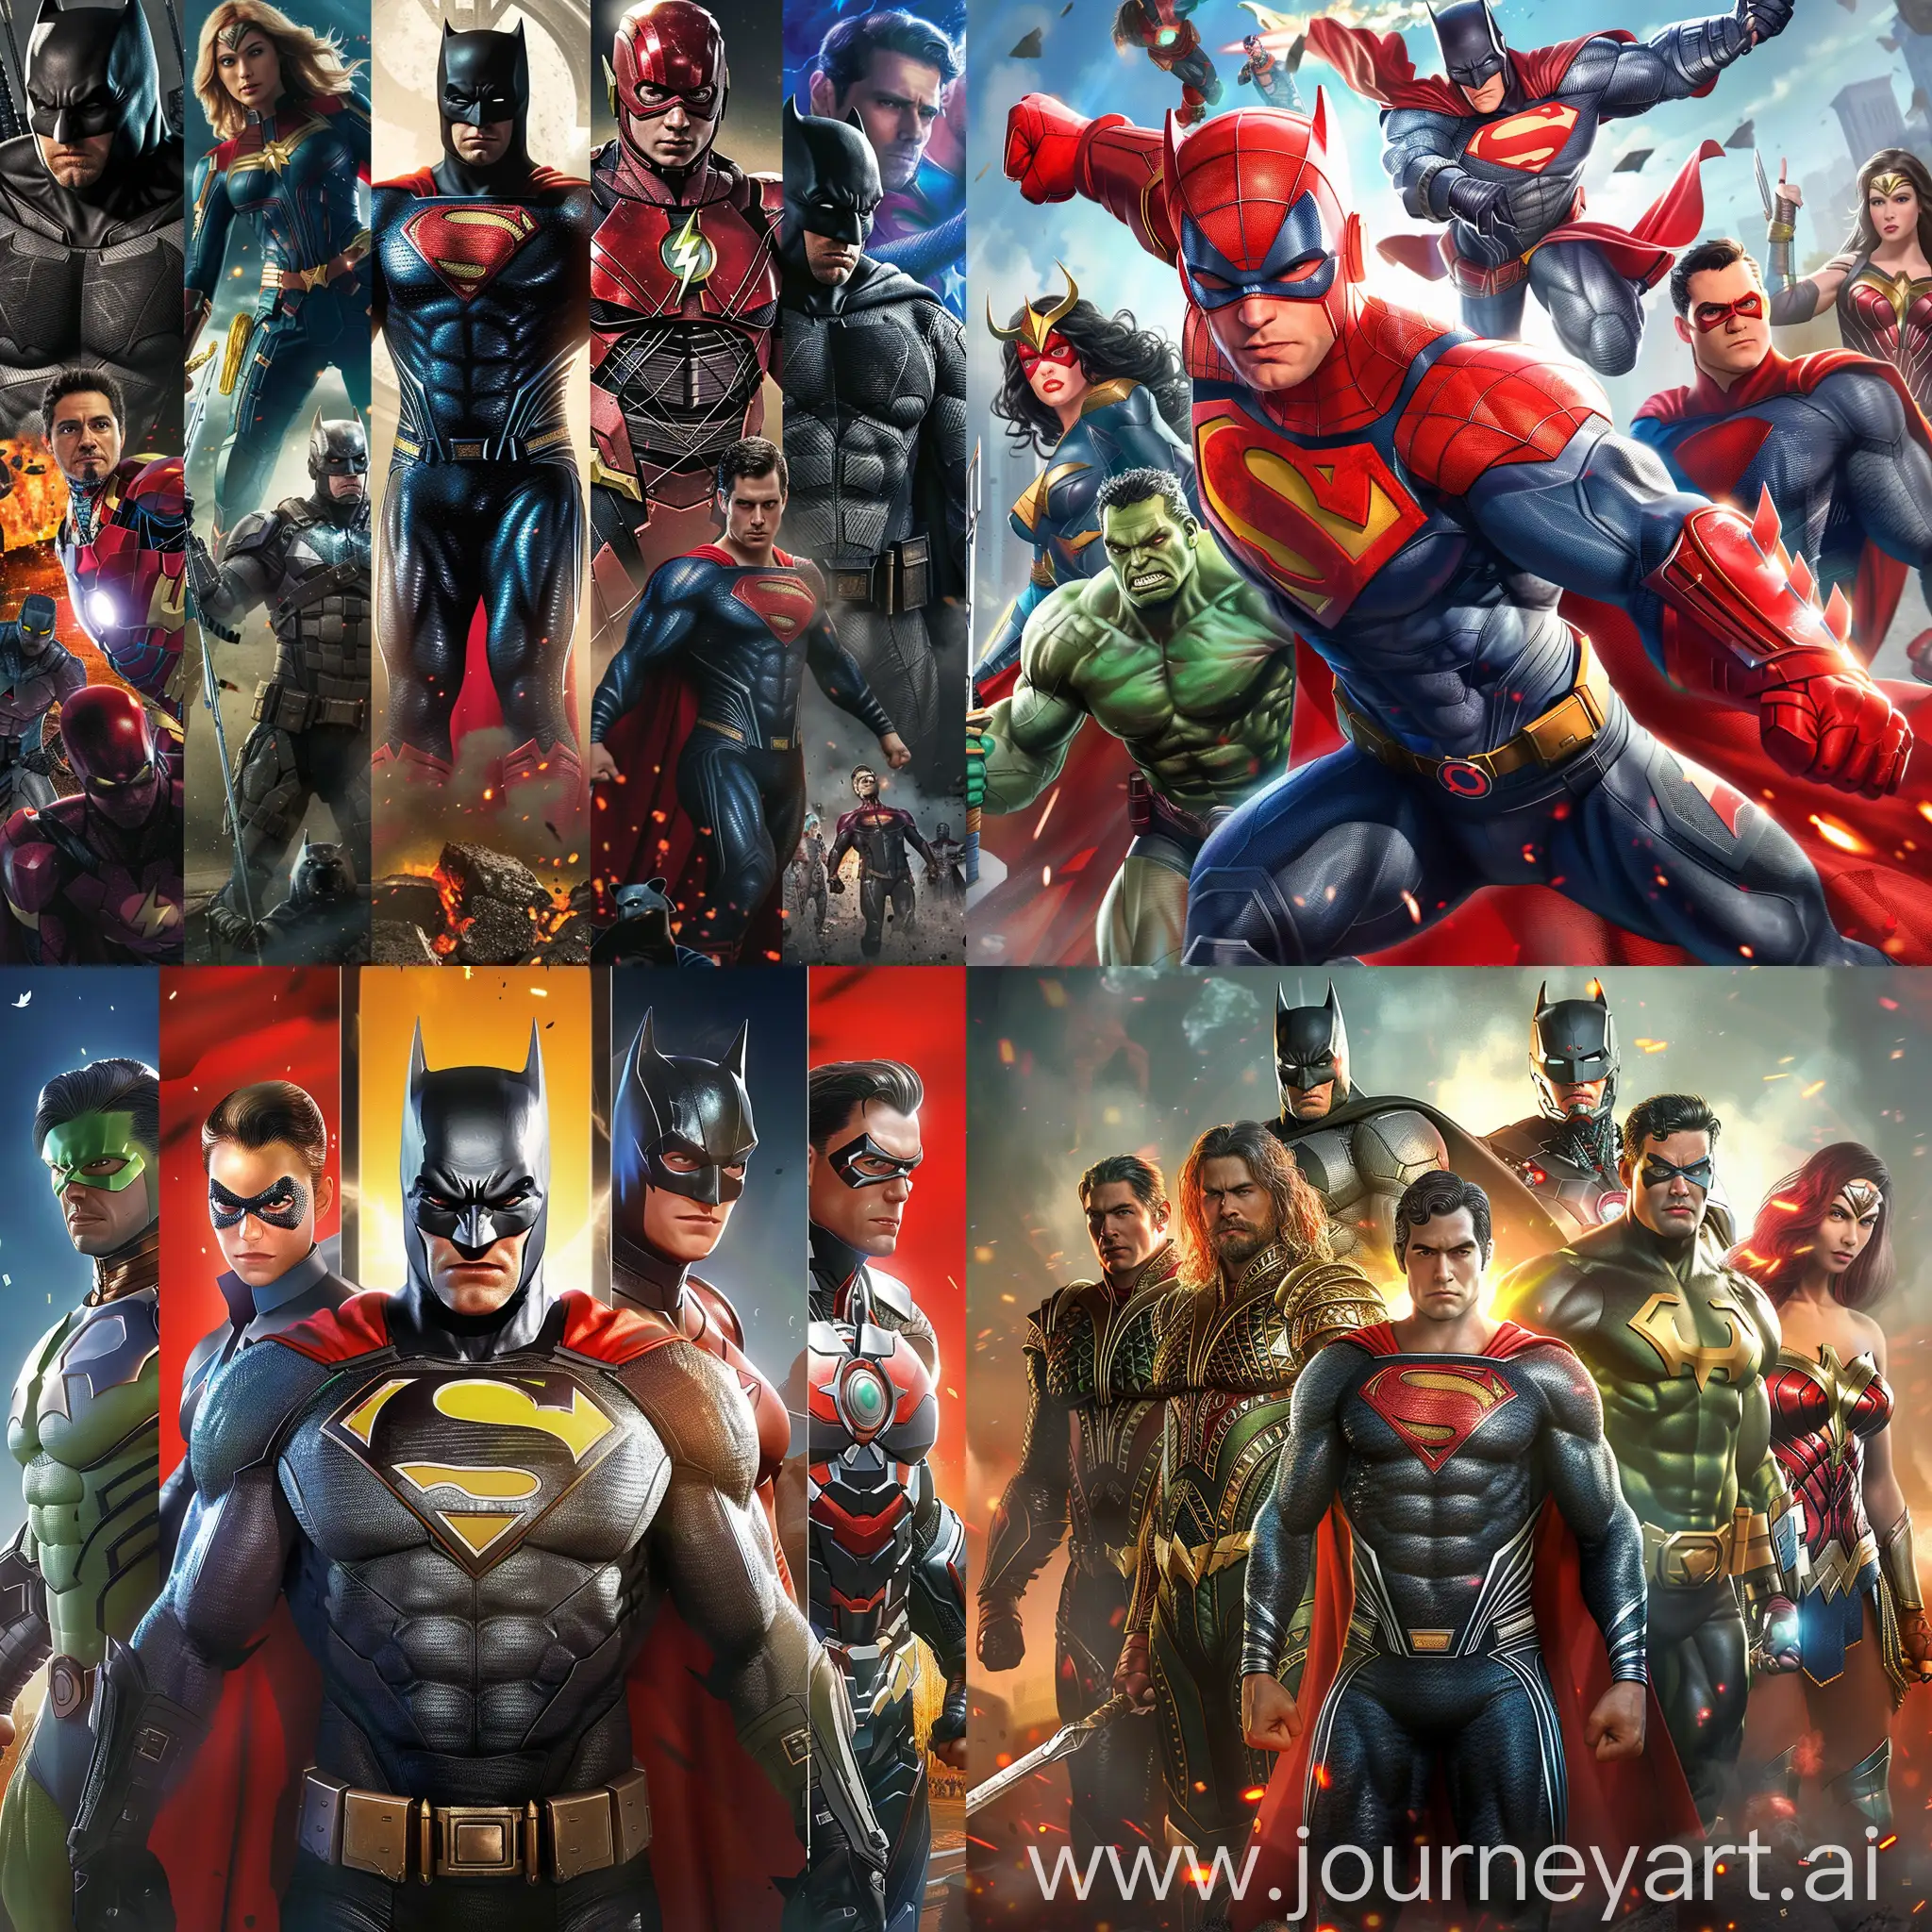 Exciting-Superhero-Offline-Games-Compilation-Perfect-YouTube-Background